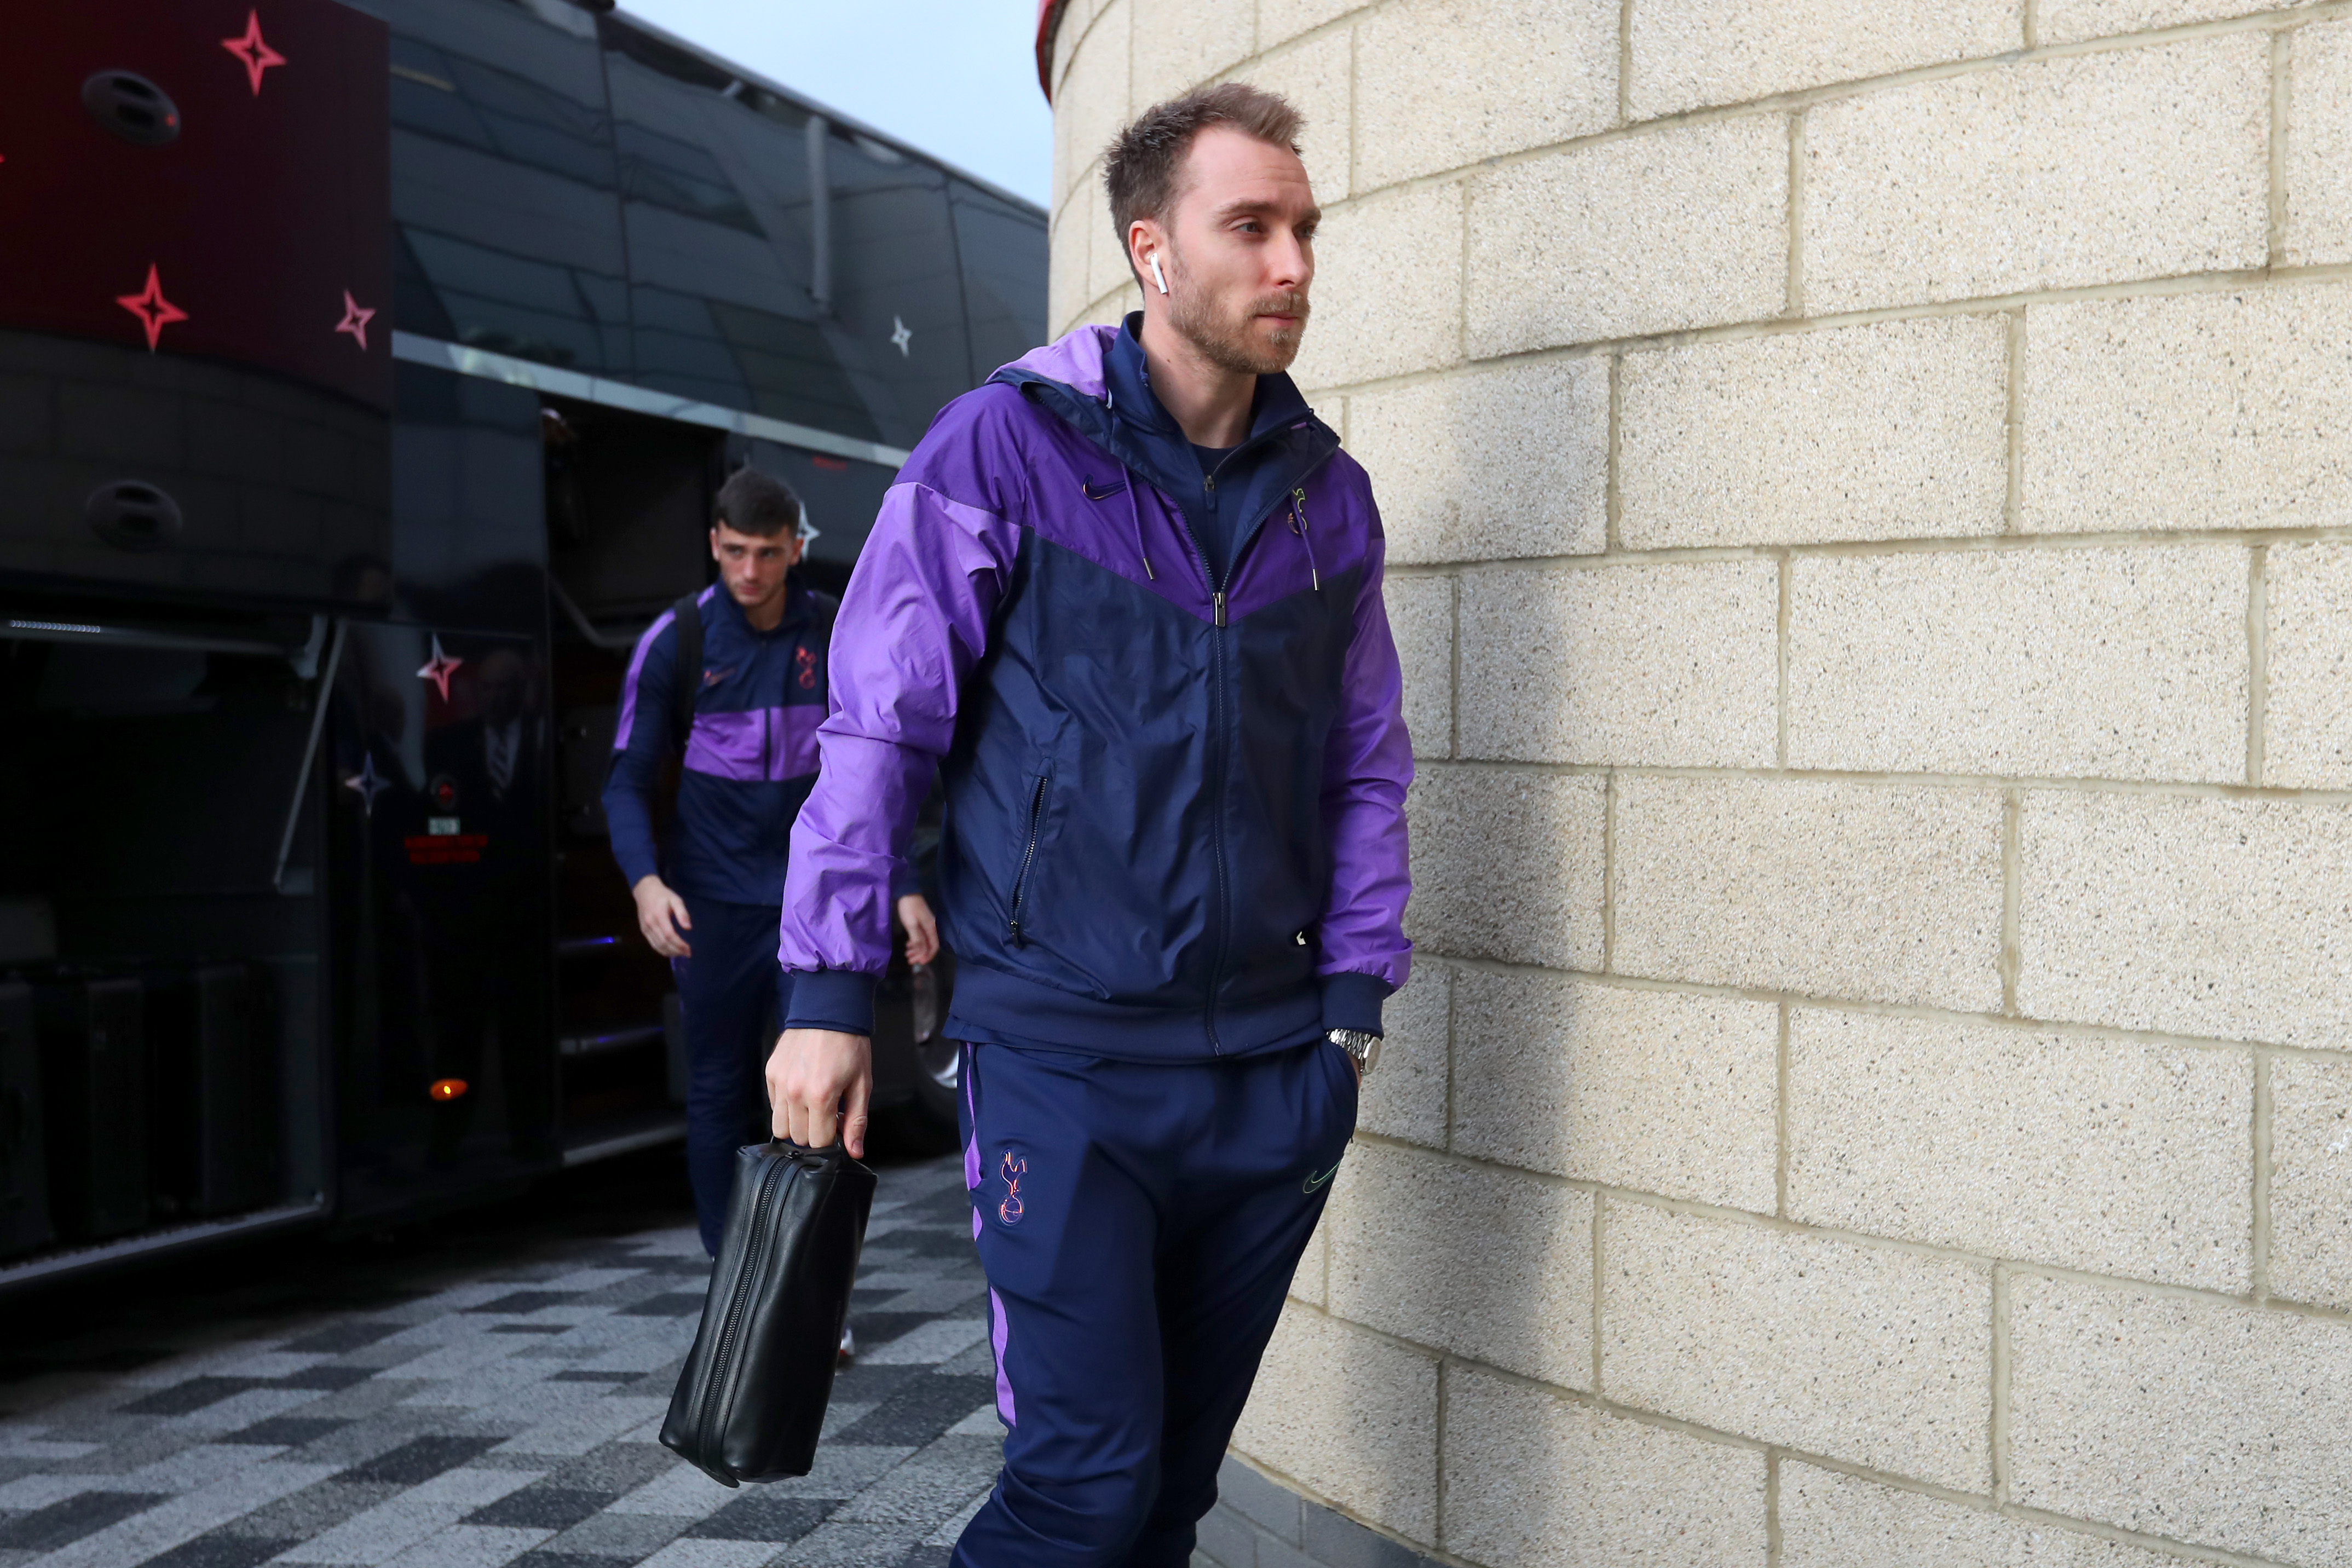 MIDDLESBROUGH, ENGLAND - JANUARY 05: Christian Eriksen of Tottenham Hotspur arrives at the stadium prior to the FA Cup Third Round match between Middlesbrough and Tottenham Hotspur at Riverside Stadium on January 05, 2020 in Middlesbrough, England. (Photo by Alex Livesey/Getty Images)